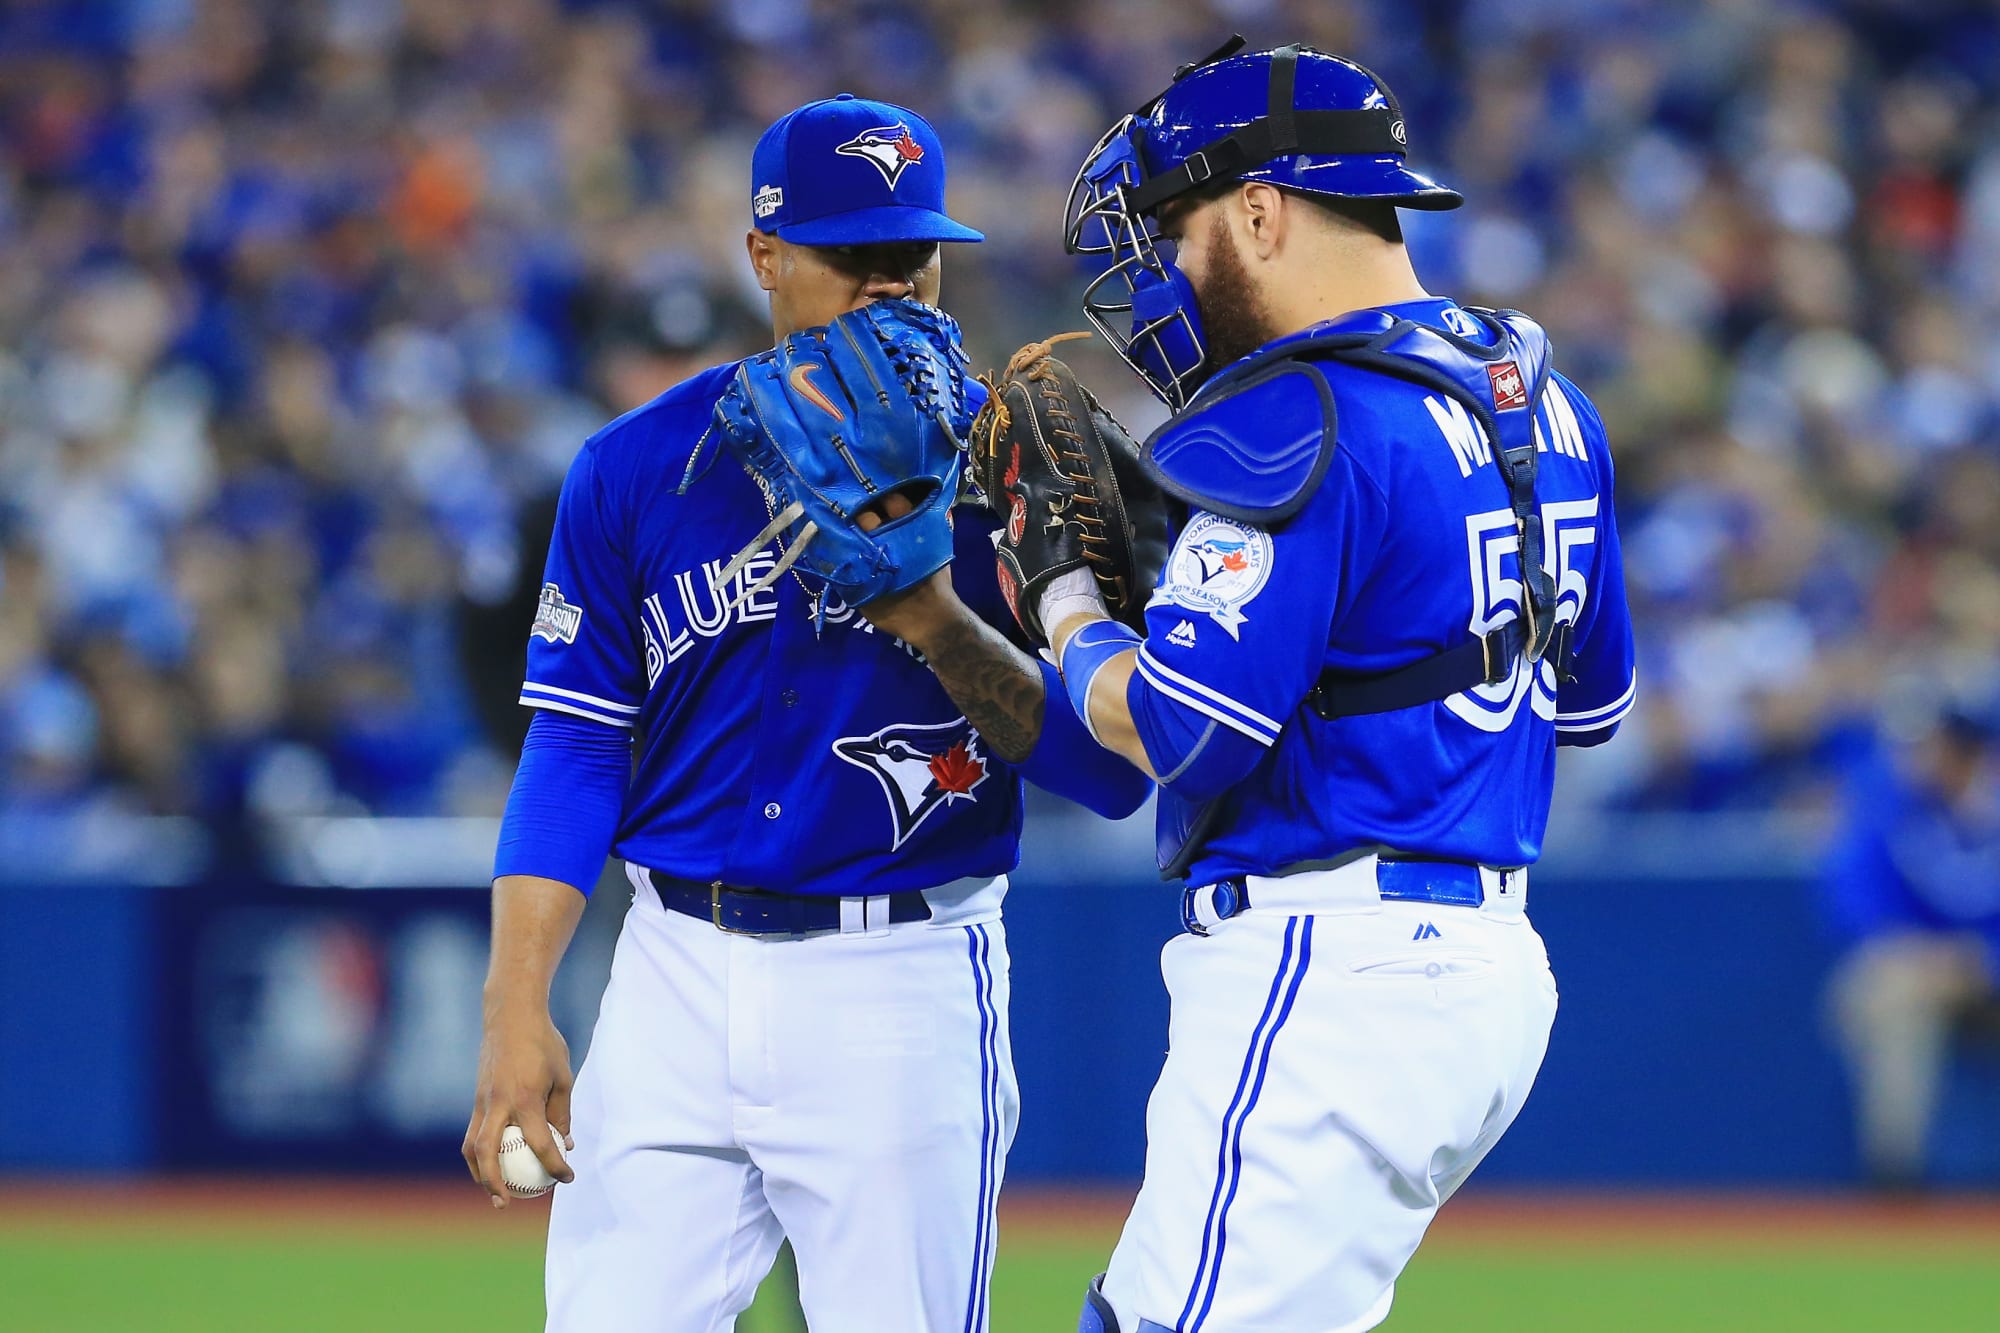 Toronto Blue Jays Season Preview Looking at the starting rotation